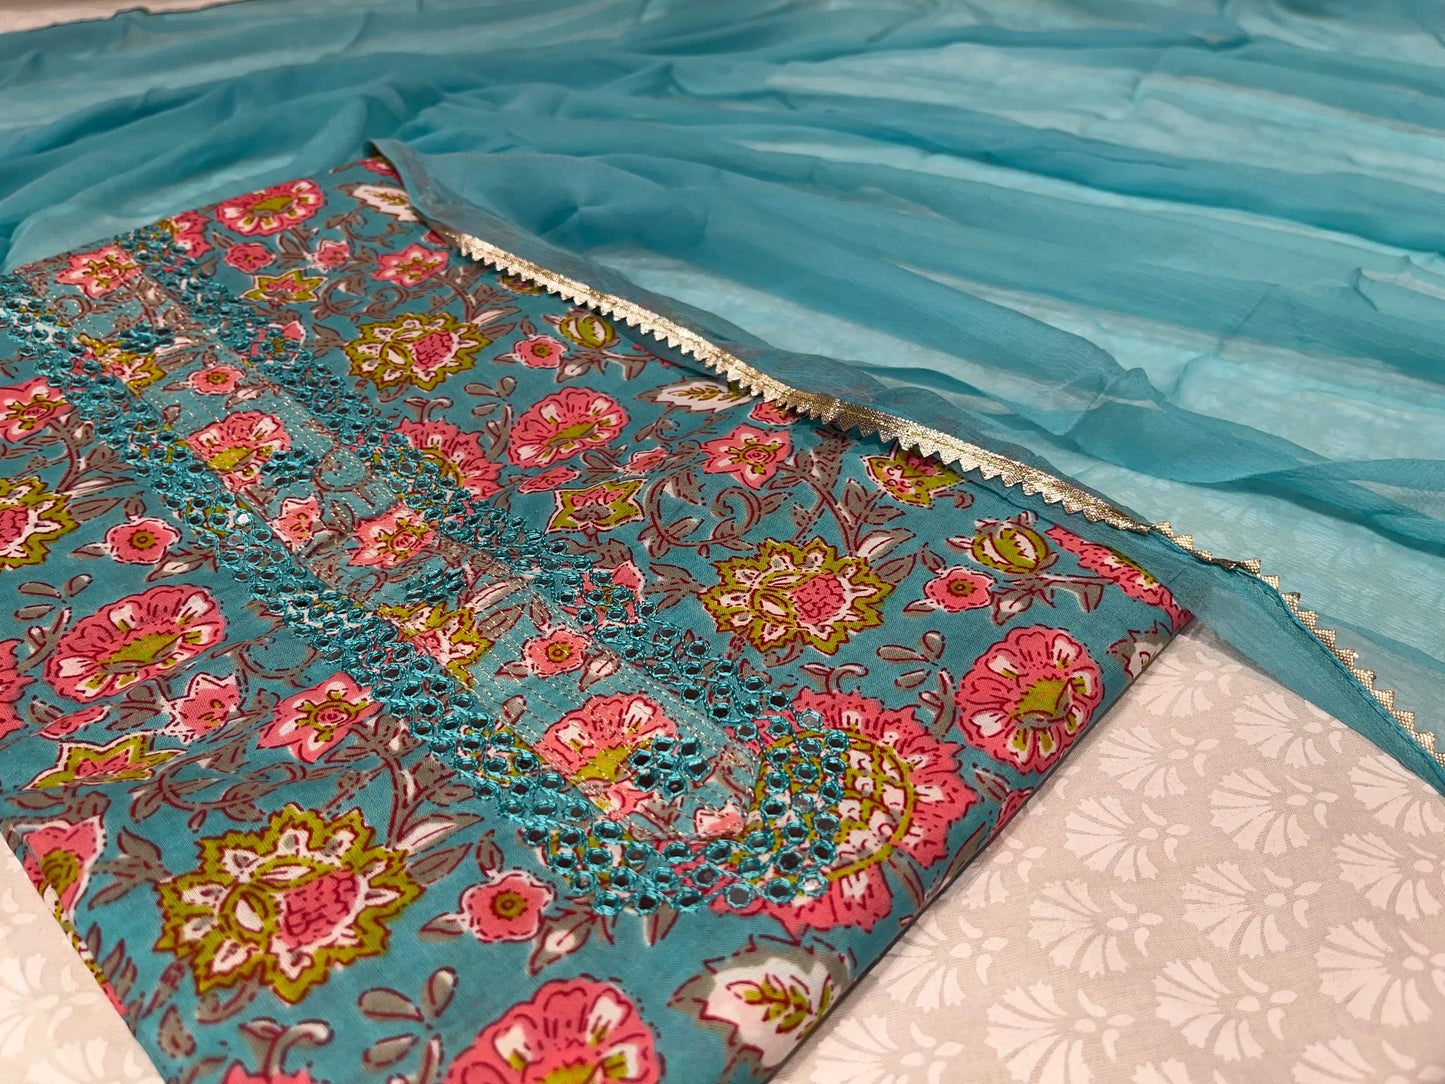 (DELIVERY IN 25-30 DAYS) SKY BLUE COTTON PRINTED SUIT WITH CHIFFON DUPATTA EMBELLISHED WITH MIRROR WORK